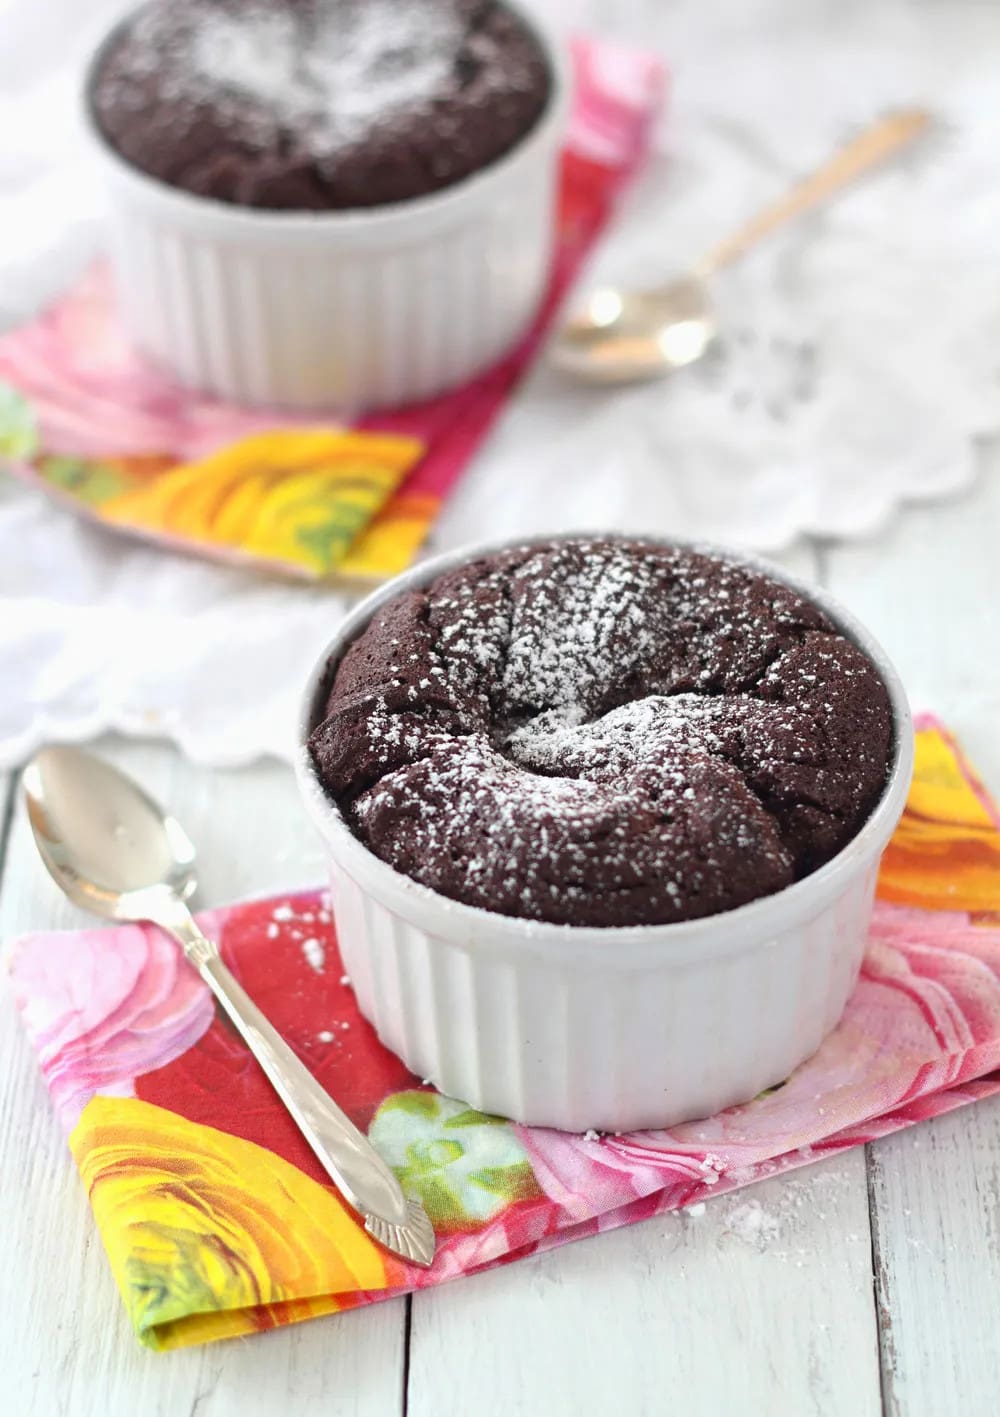 Chocolate Soufflé For Two